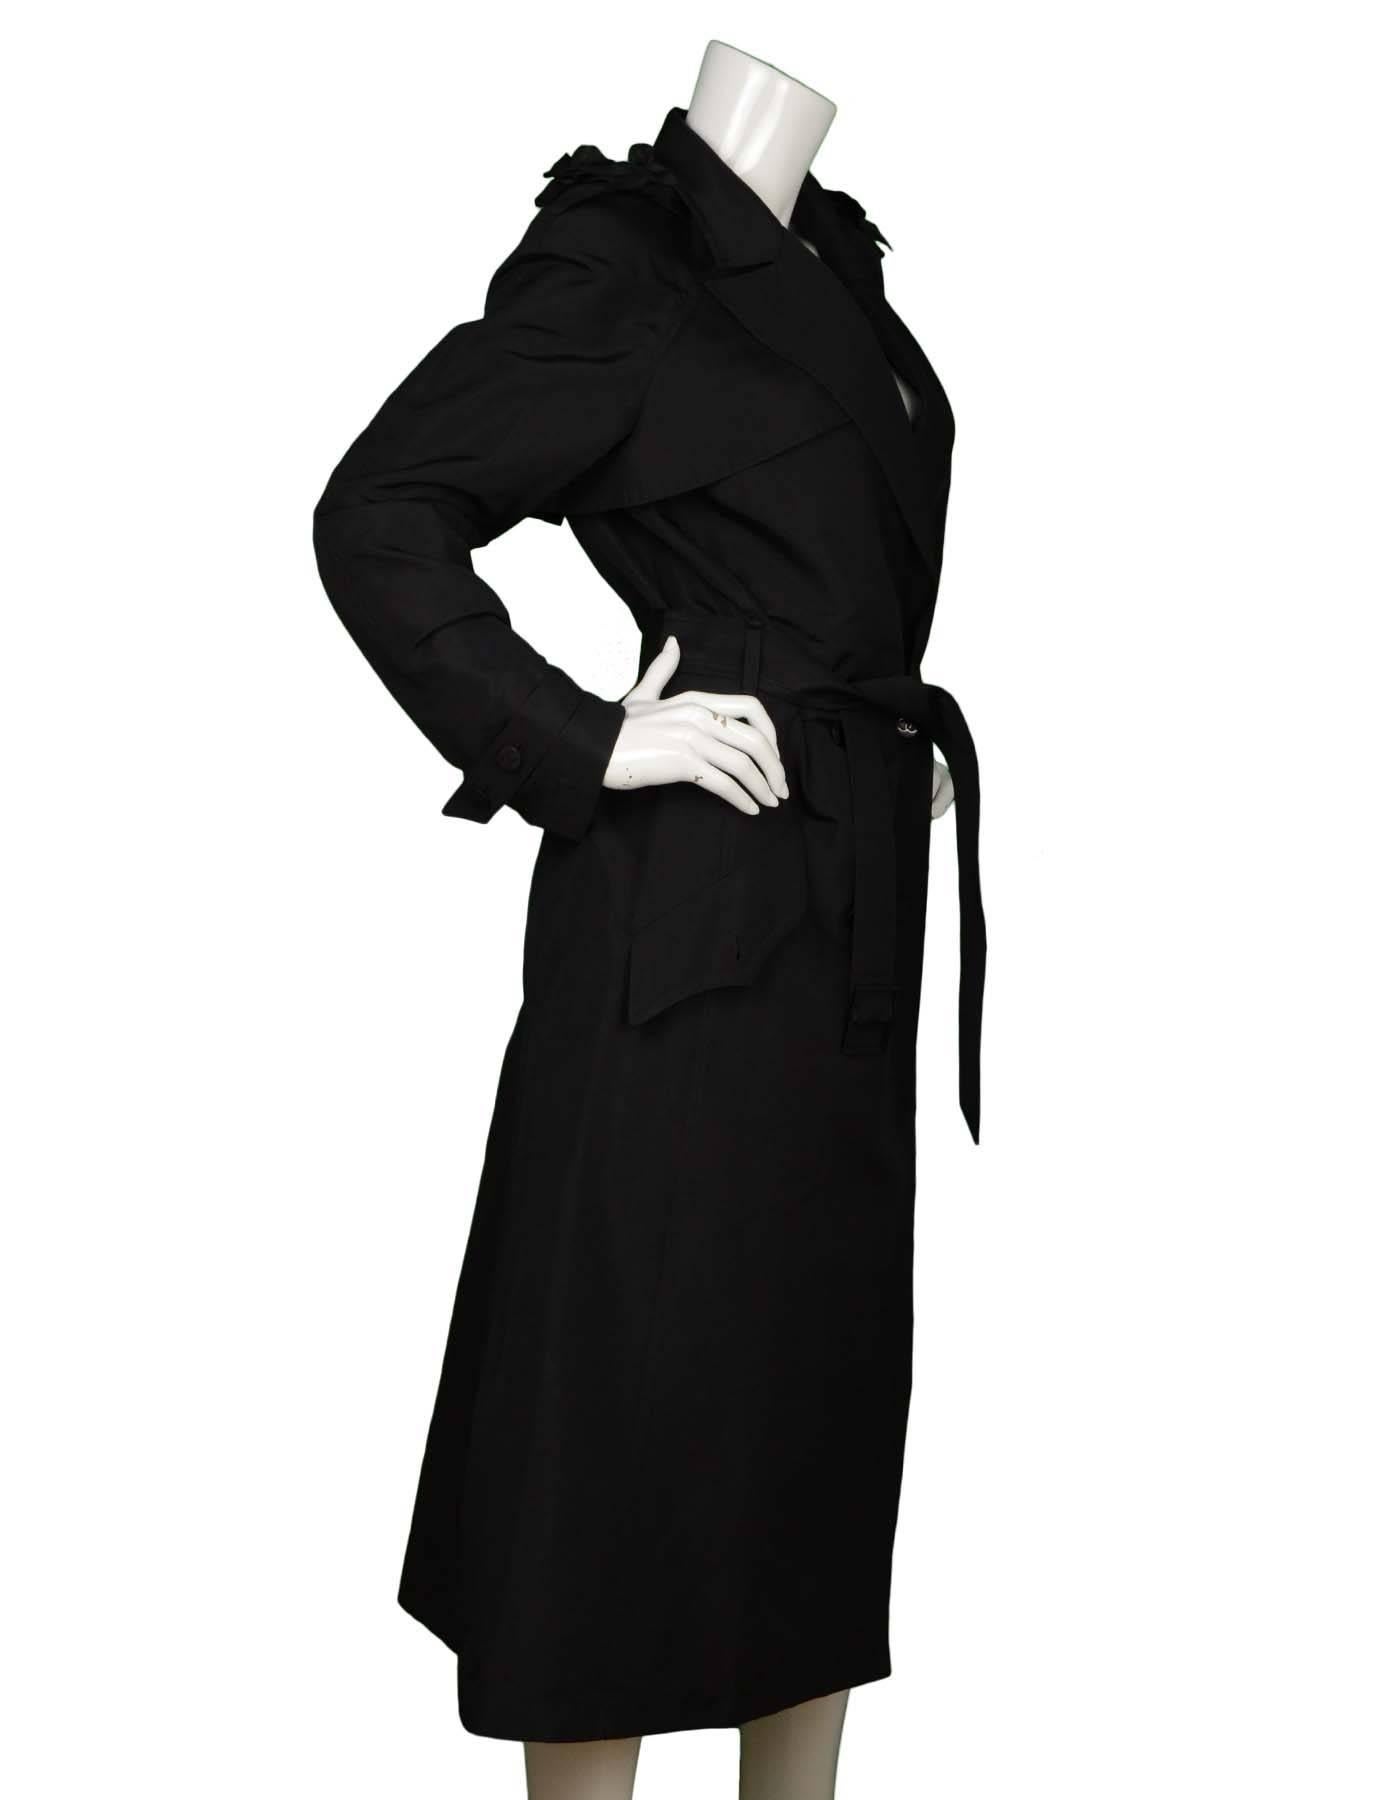 Chanel Black Silk Long Belted Trench Coat 
Features camelia flower appliques at shoulders
Made In: France
Year of Production: 2003
Color: Black
Composition: 100% silk
Lining: None
Closure/Opening: Double breasted button front closure with